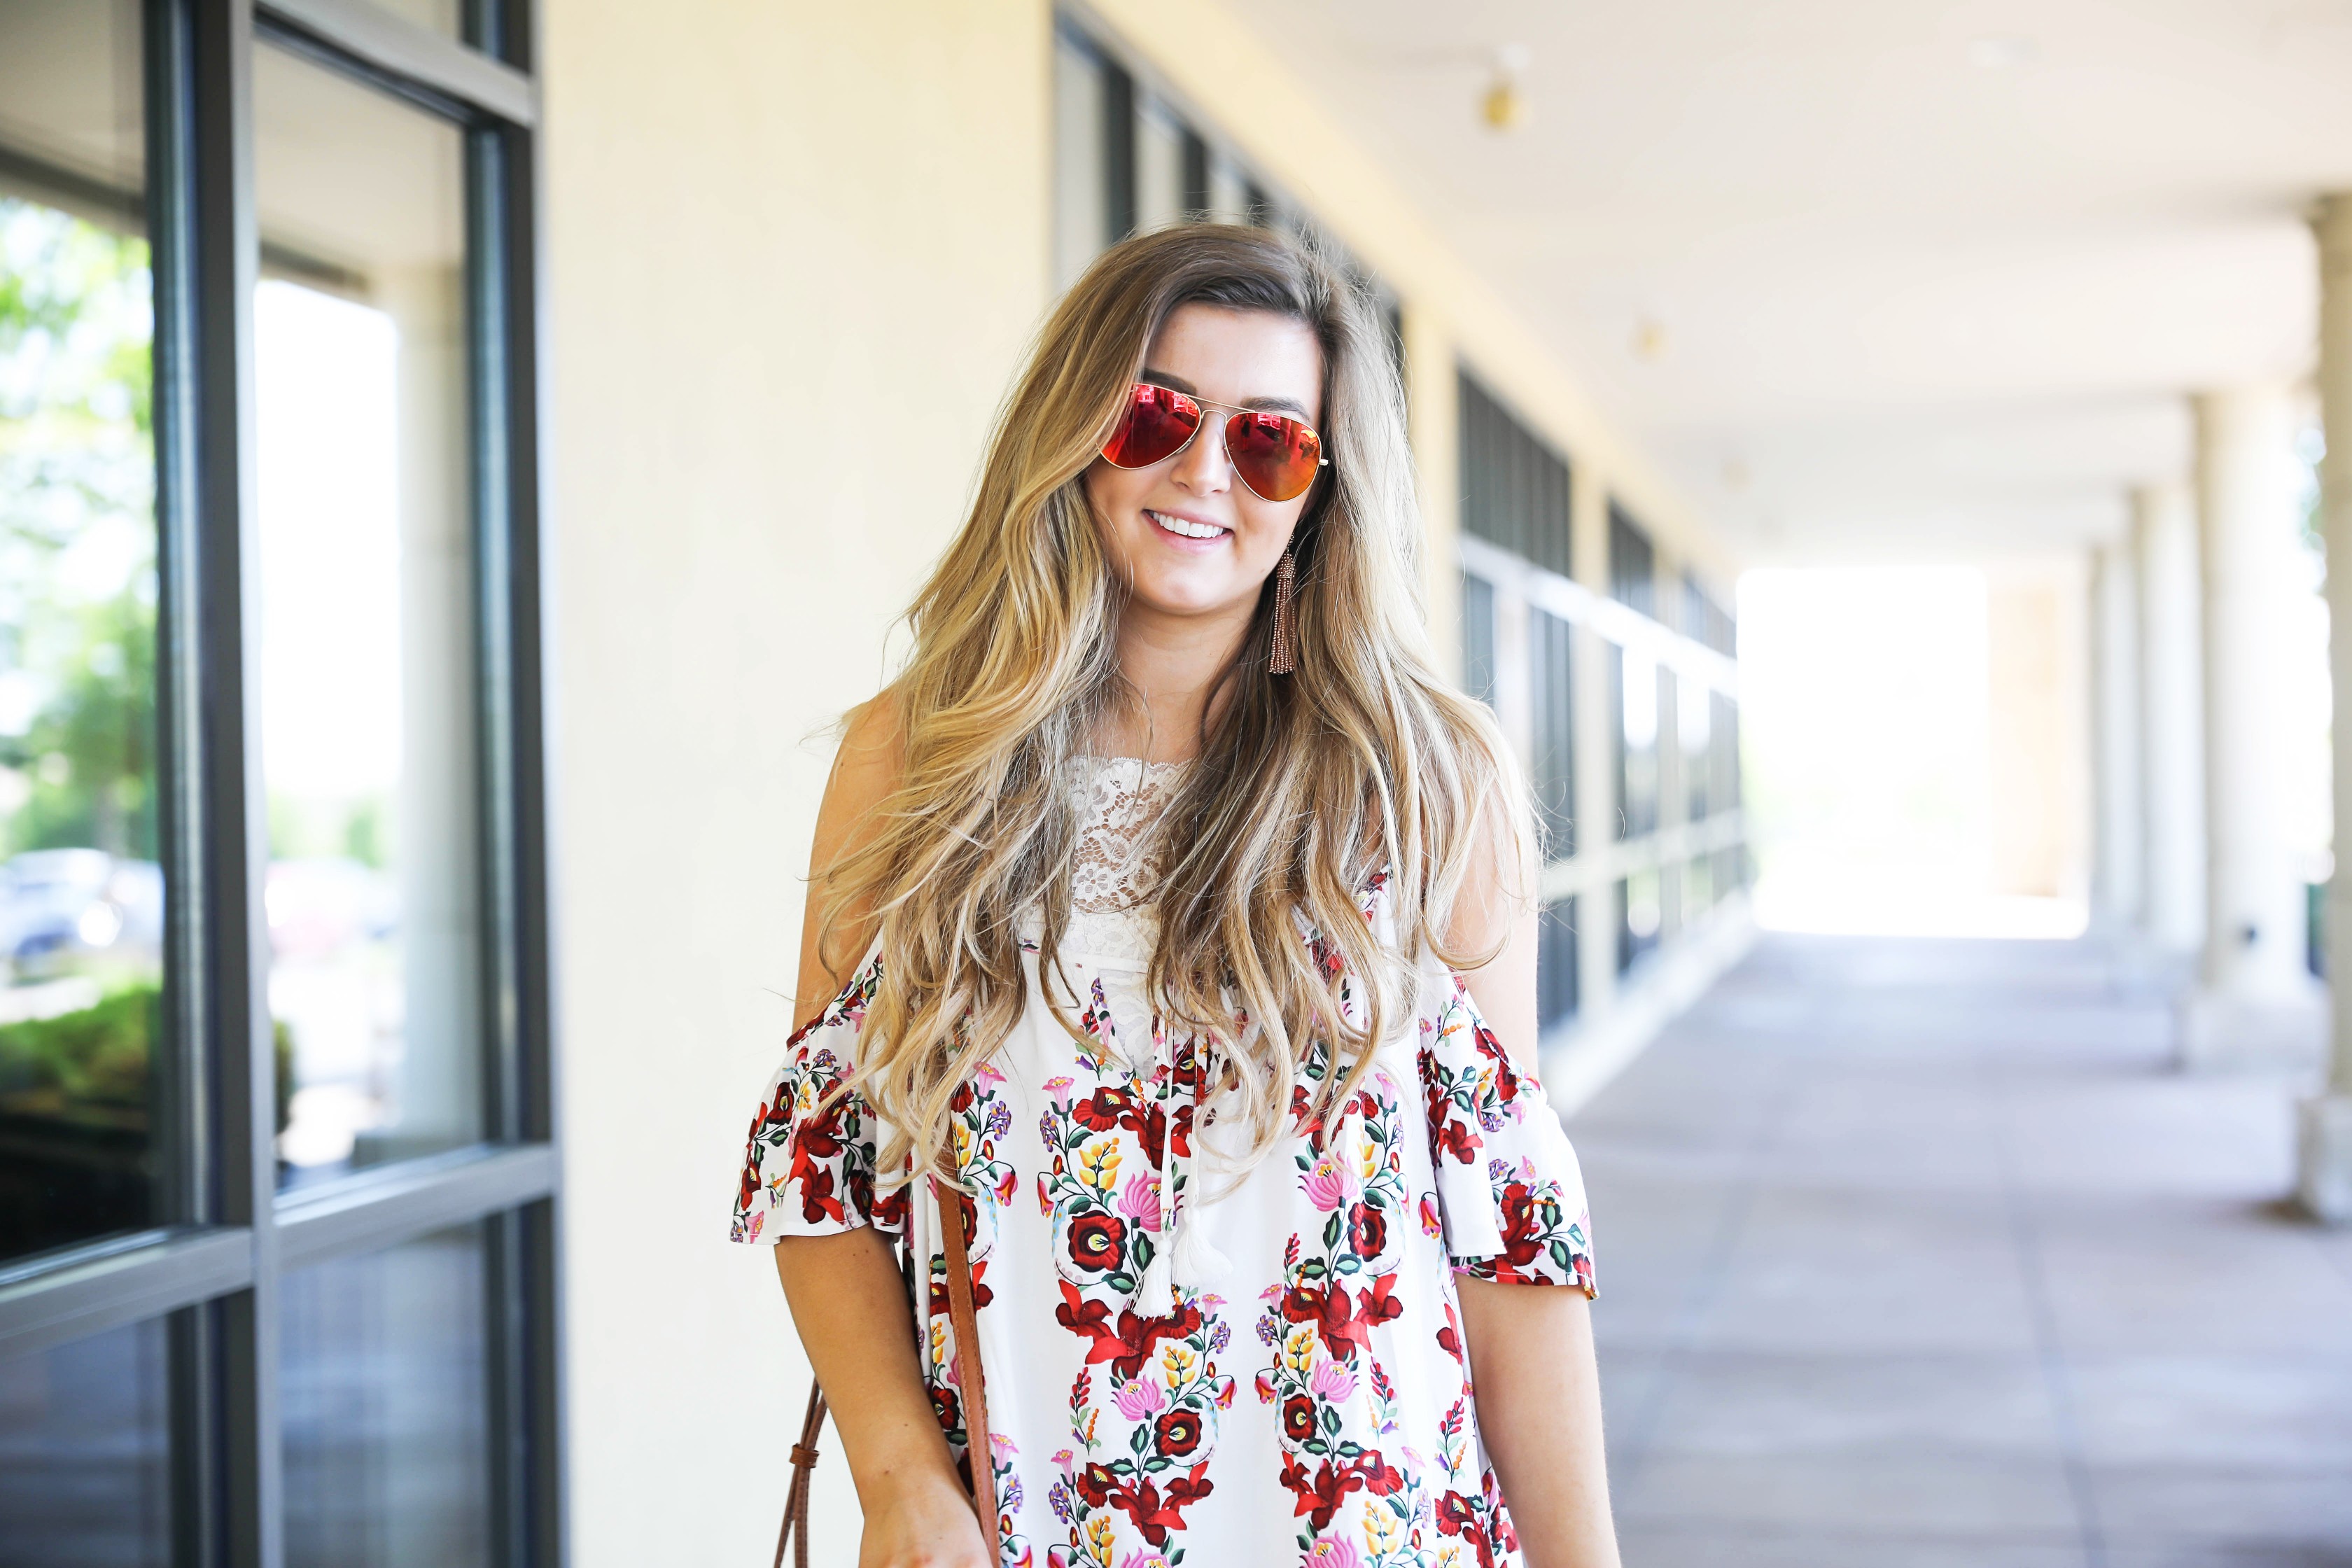 Floral MuMu Romper with lace bralette on Fashion Blog Daily Dose of Charm by Lauren Lindmark